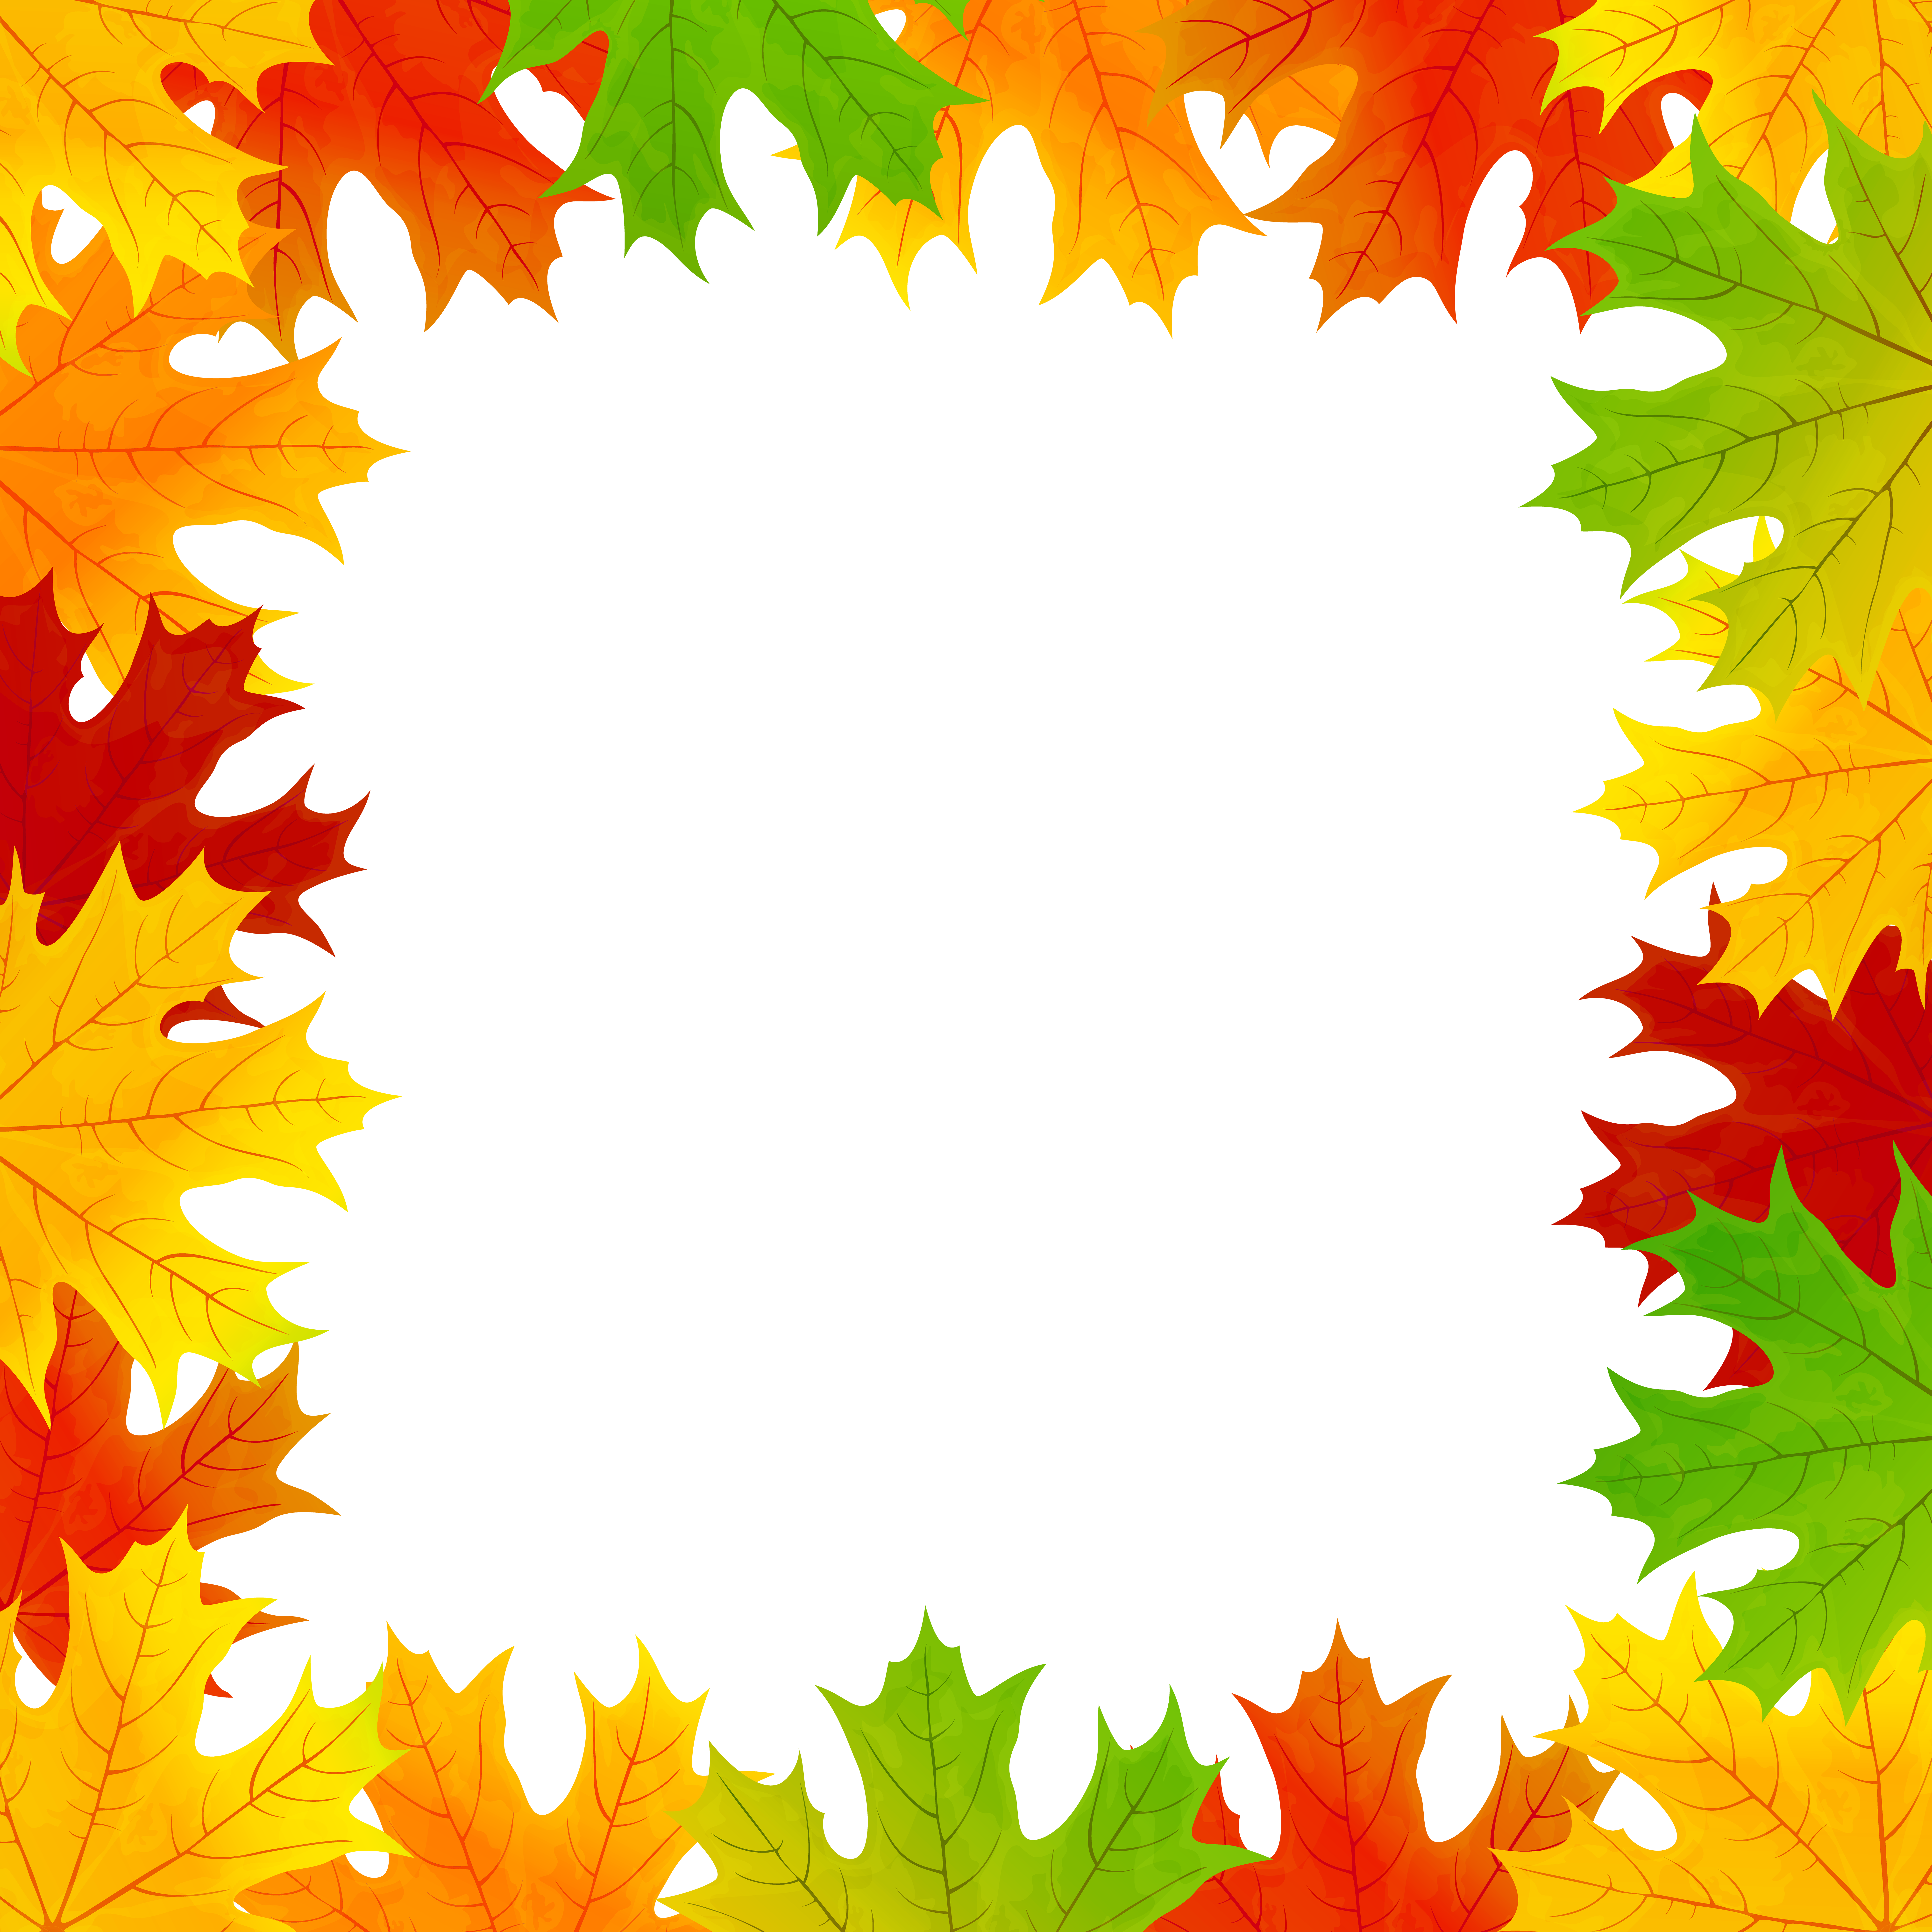 Fall Leaves Border Frame Png Clip Art Image Gallery Yopriceville High Quality Images And Transparent Png Free Clipart